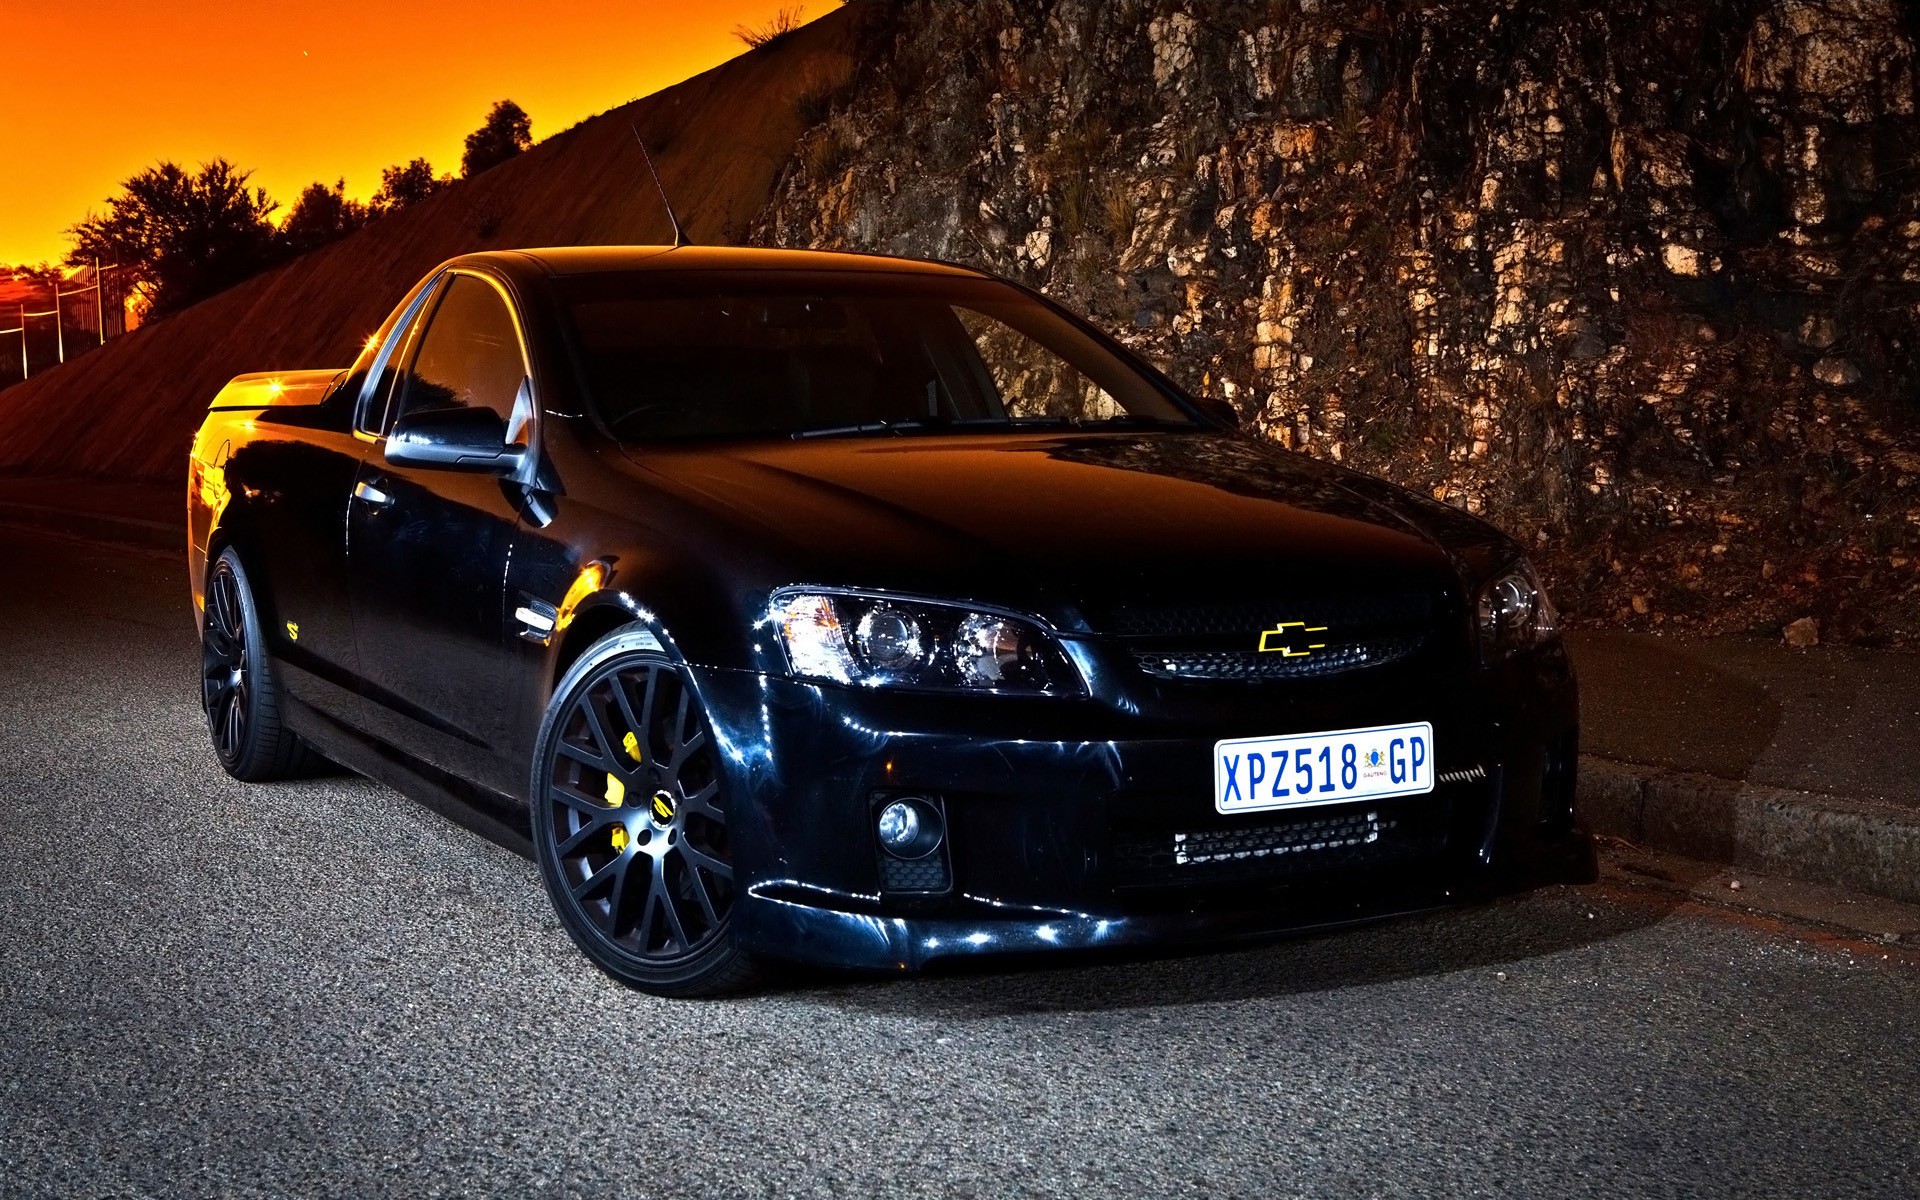 black, Cars, Chevrolet, Vehicles, Holden, Commodore, Racing, Cars Wallpaper